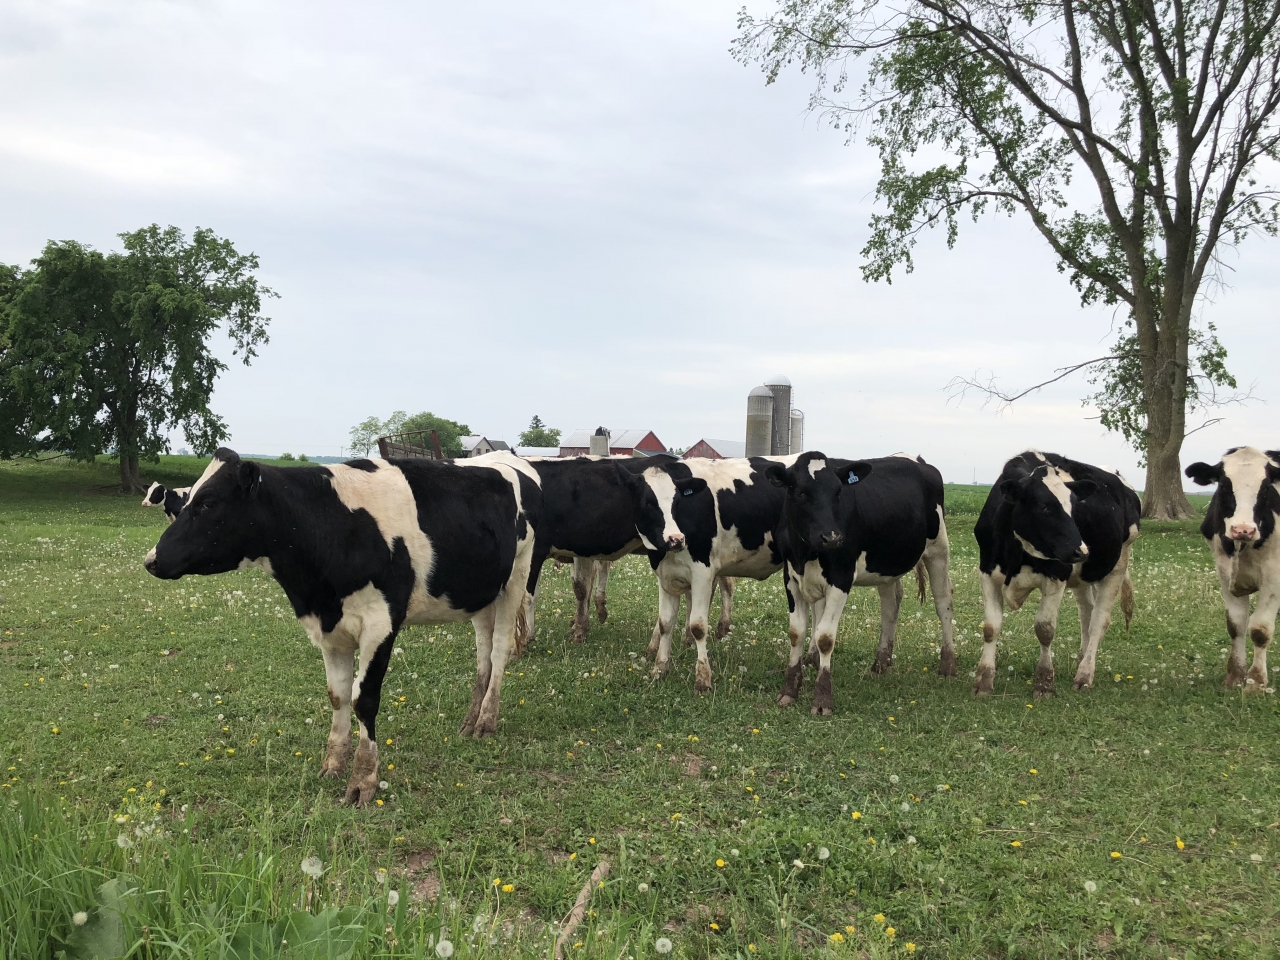 The new Roadmap for a Sustainable Dairy System can help transform our nation's agricultural landscape for the benefit of farmers, communities, and the environment. © Paige Frautschy/TNC